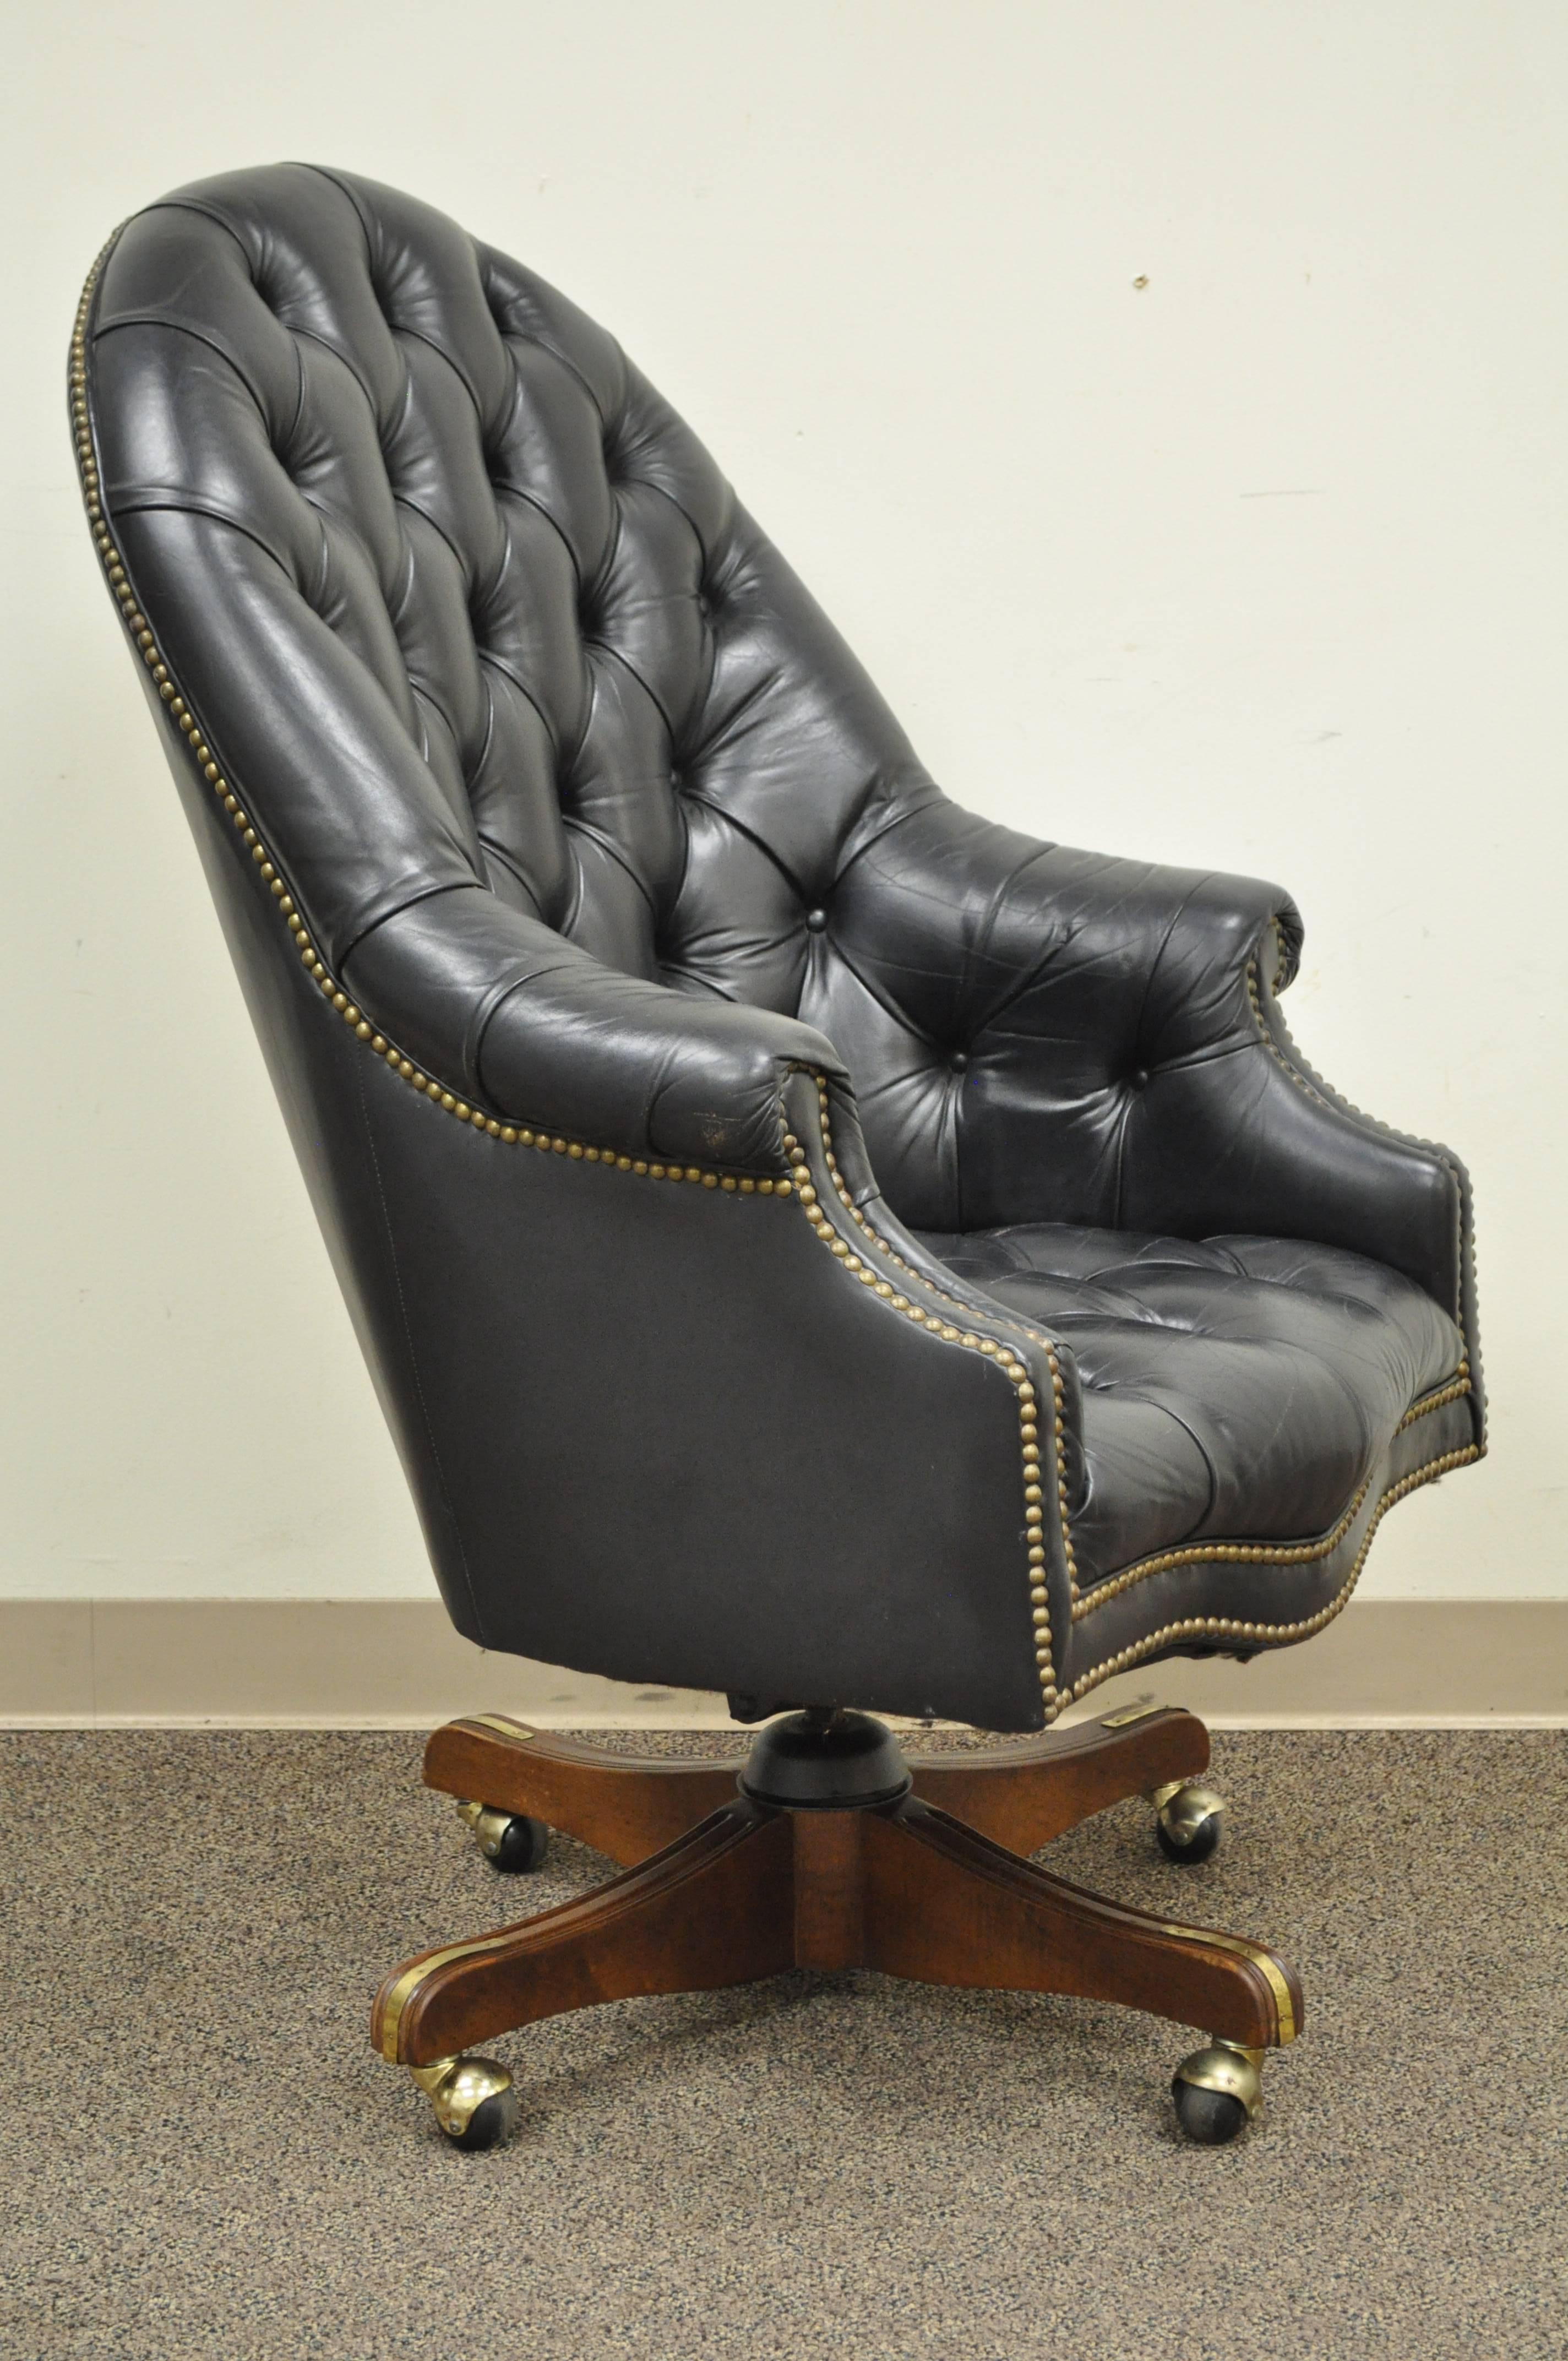 Vintage deep tufted black leather English Chesterfield style barrel back desk chair. Item features rolled arms, nailhead trim, deep button tufts, and a solid wood base on rolling casters. Leather has achieved a beautiful patina. Believed to be a